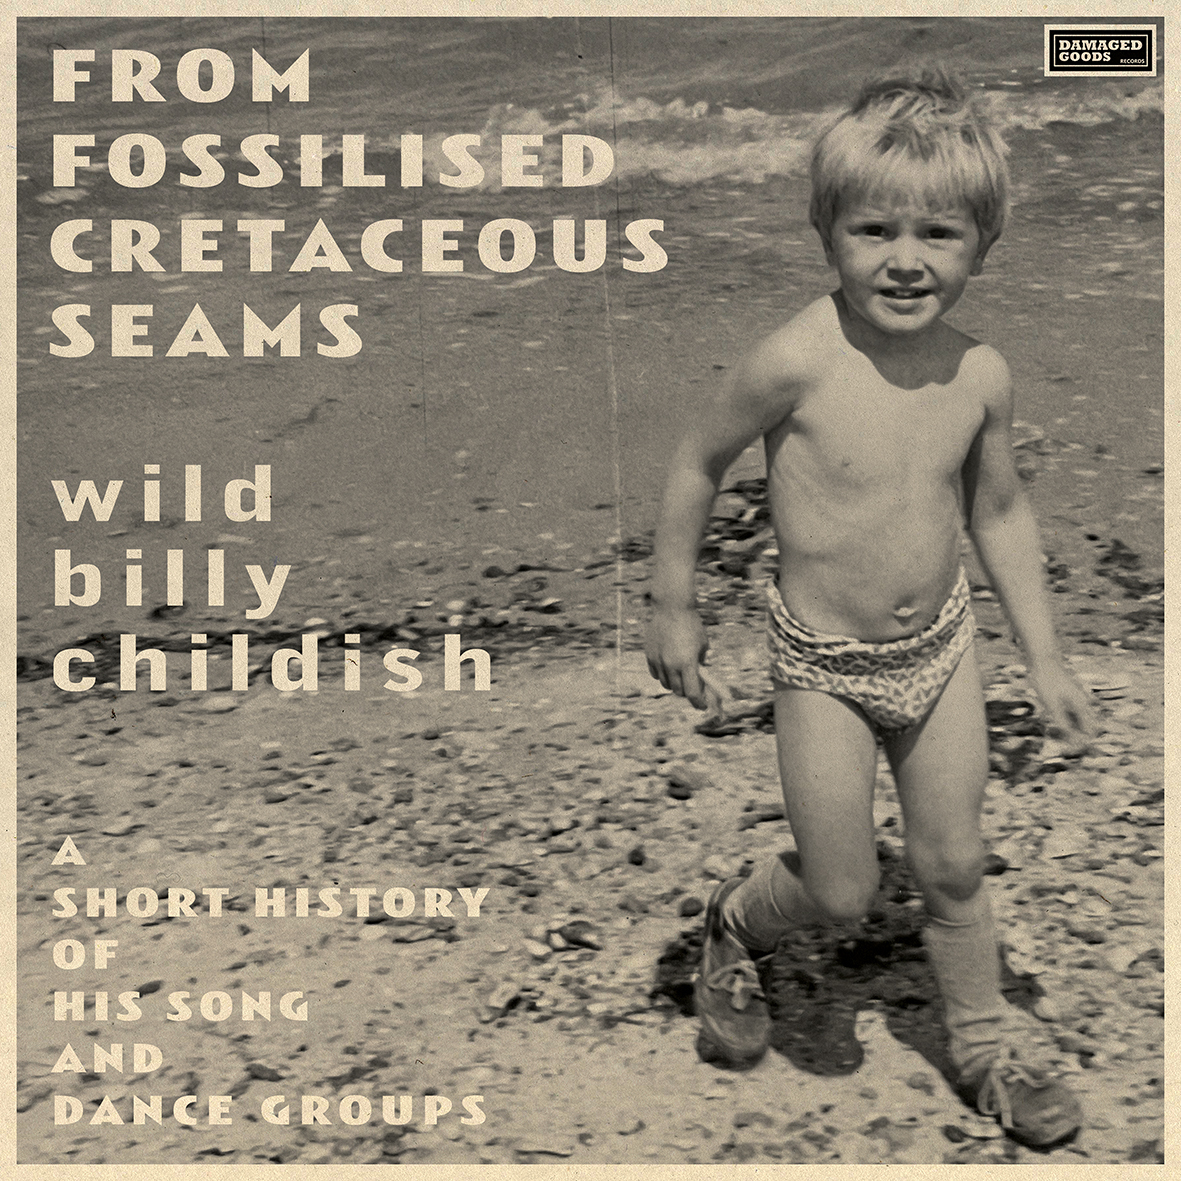 WILD BILLY CHILDISH From Fossilised Cretaceous Seams… 2LP / 2CD Preorder: resident-music.com/productdetails… A companion compilation to the new book by Ted Kessler; if ever a career retrospective needed to be on 2 discs, Wild Billy Childish’s would be top of the list! @TedKessler1…